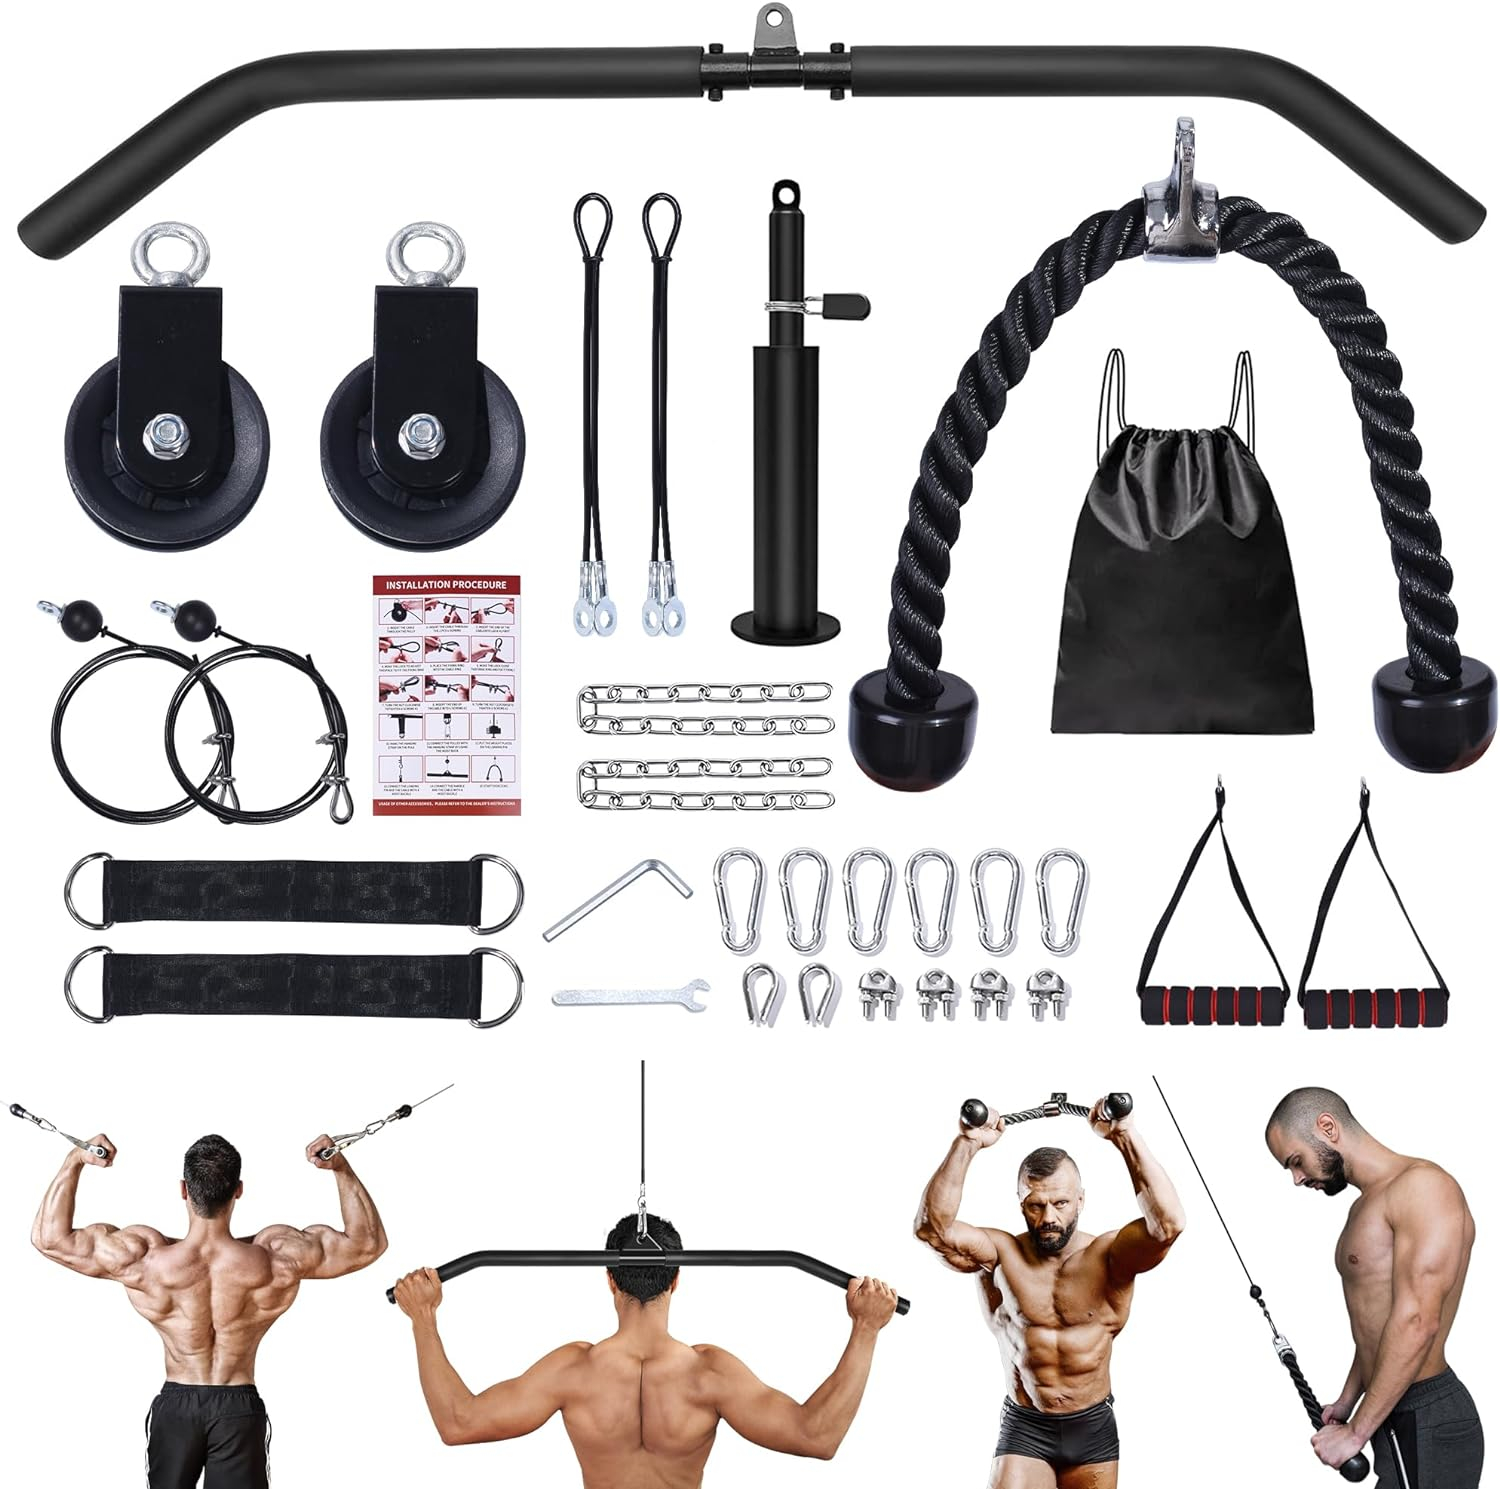 4 in 1 Upgraded Fitness LAT and Lift Pulley System Gym Cable Machine for Triceps,LAT Pull Down Attachments Home Workouts Gym Equipment for Shoulder Biceps Curl, Forearm Exercise